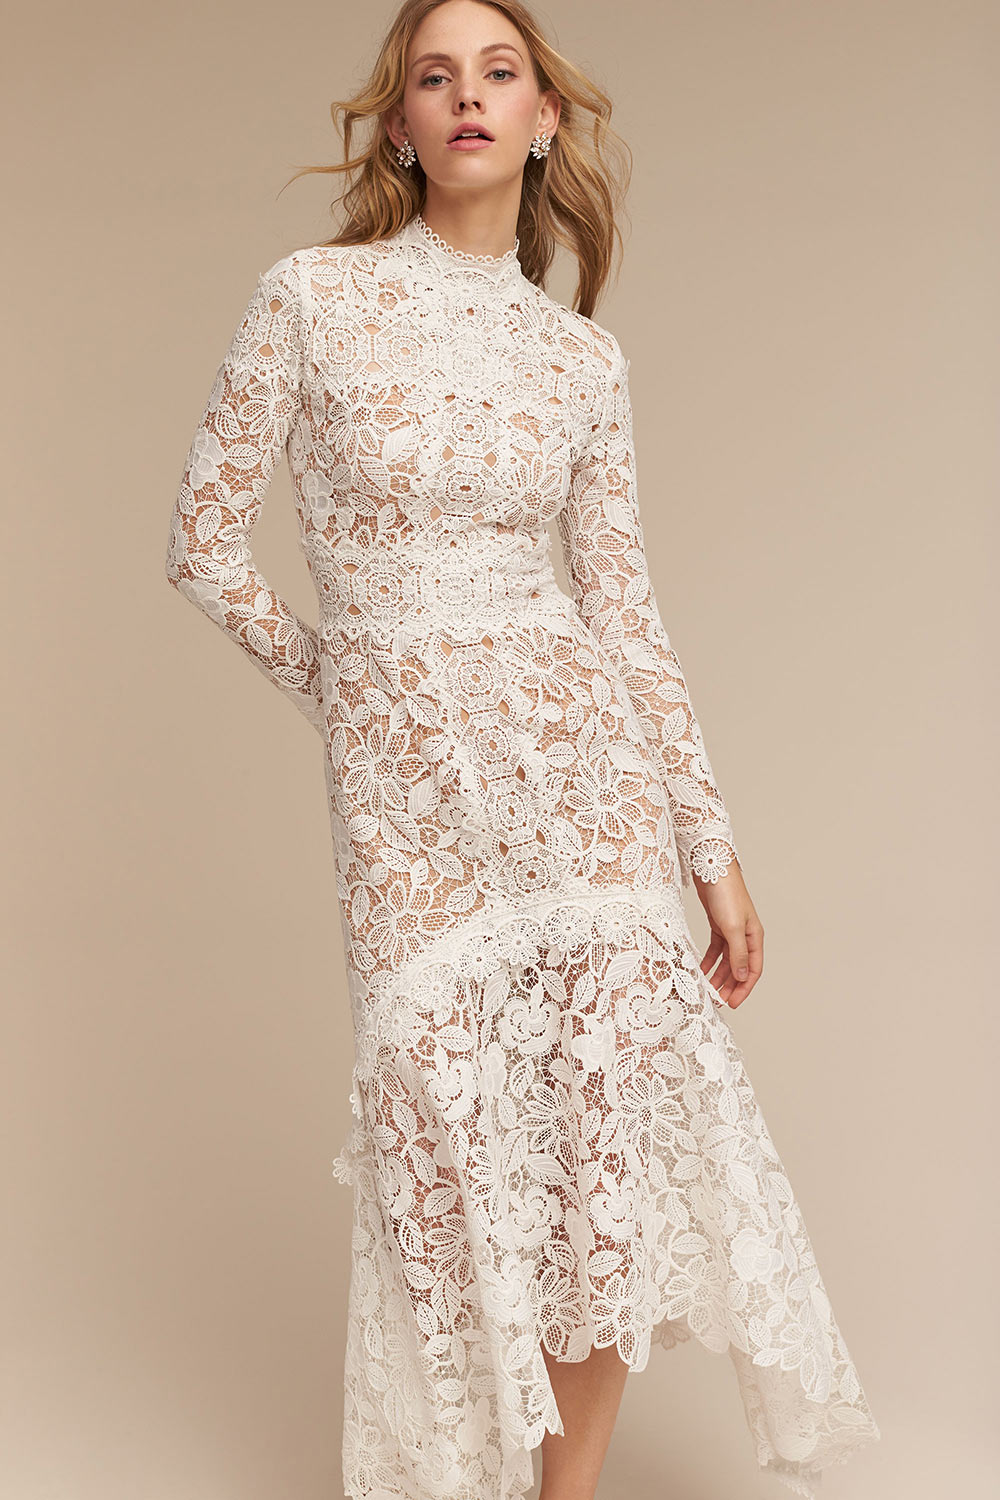 BHLDN new collection